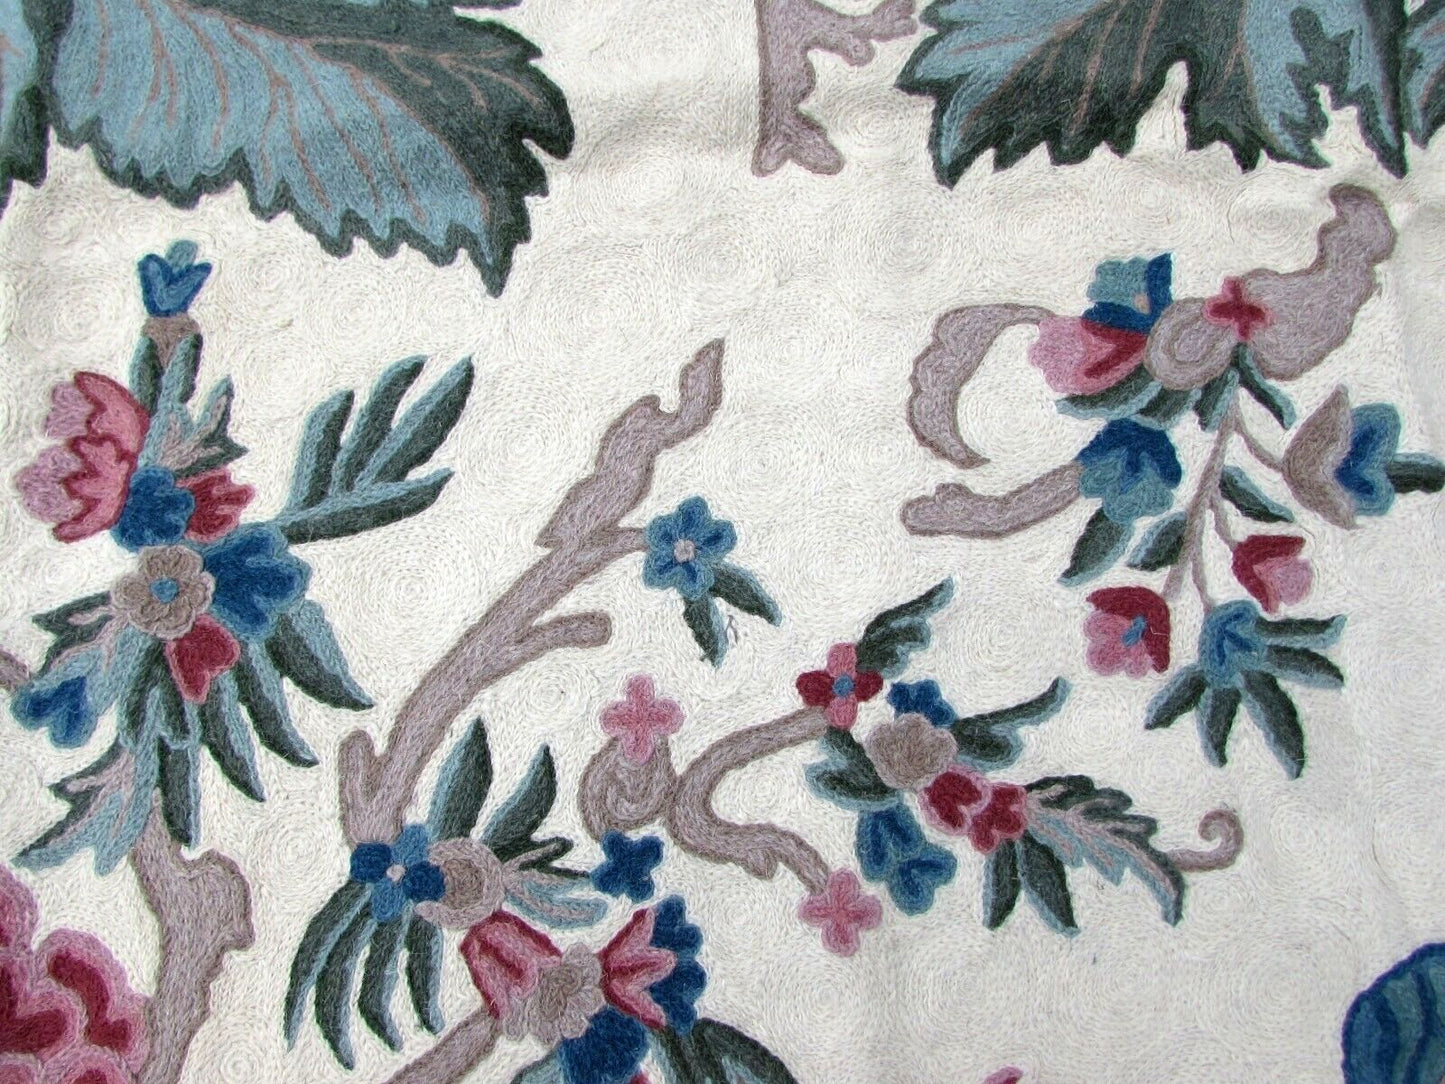 Detailed close-up of the intricate floral pattern on the Indian rug